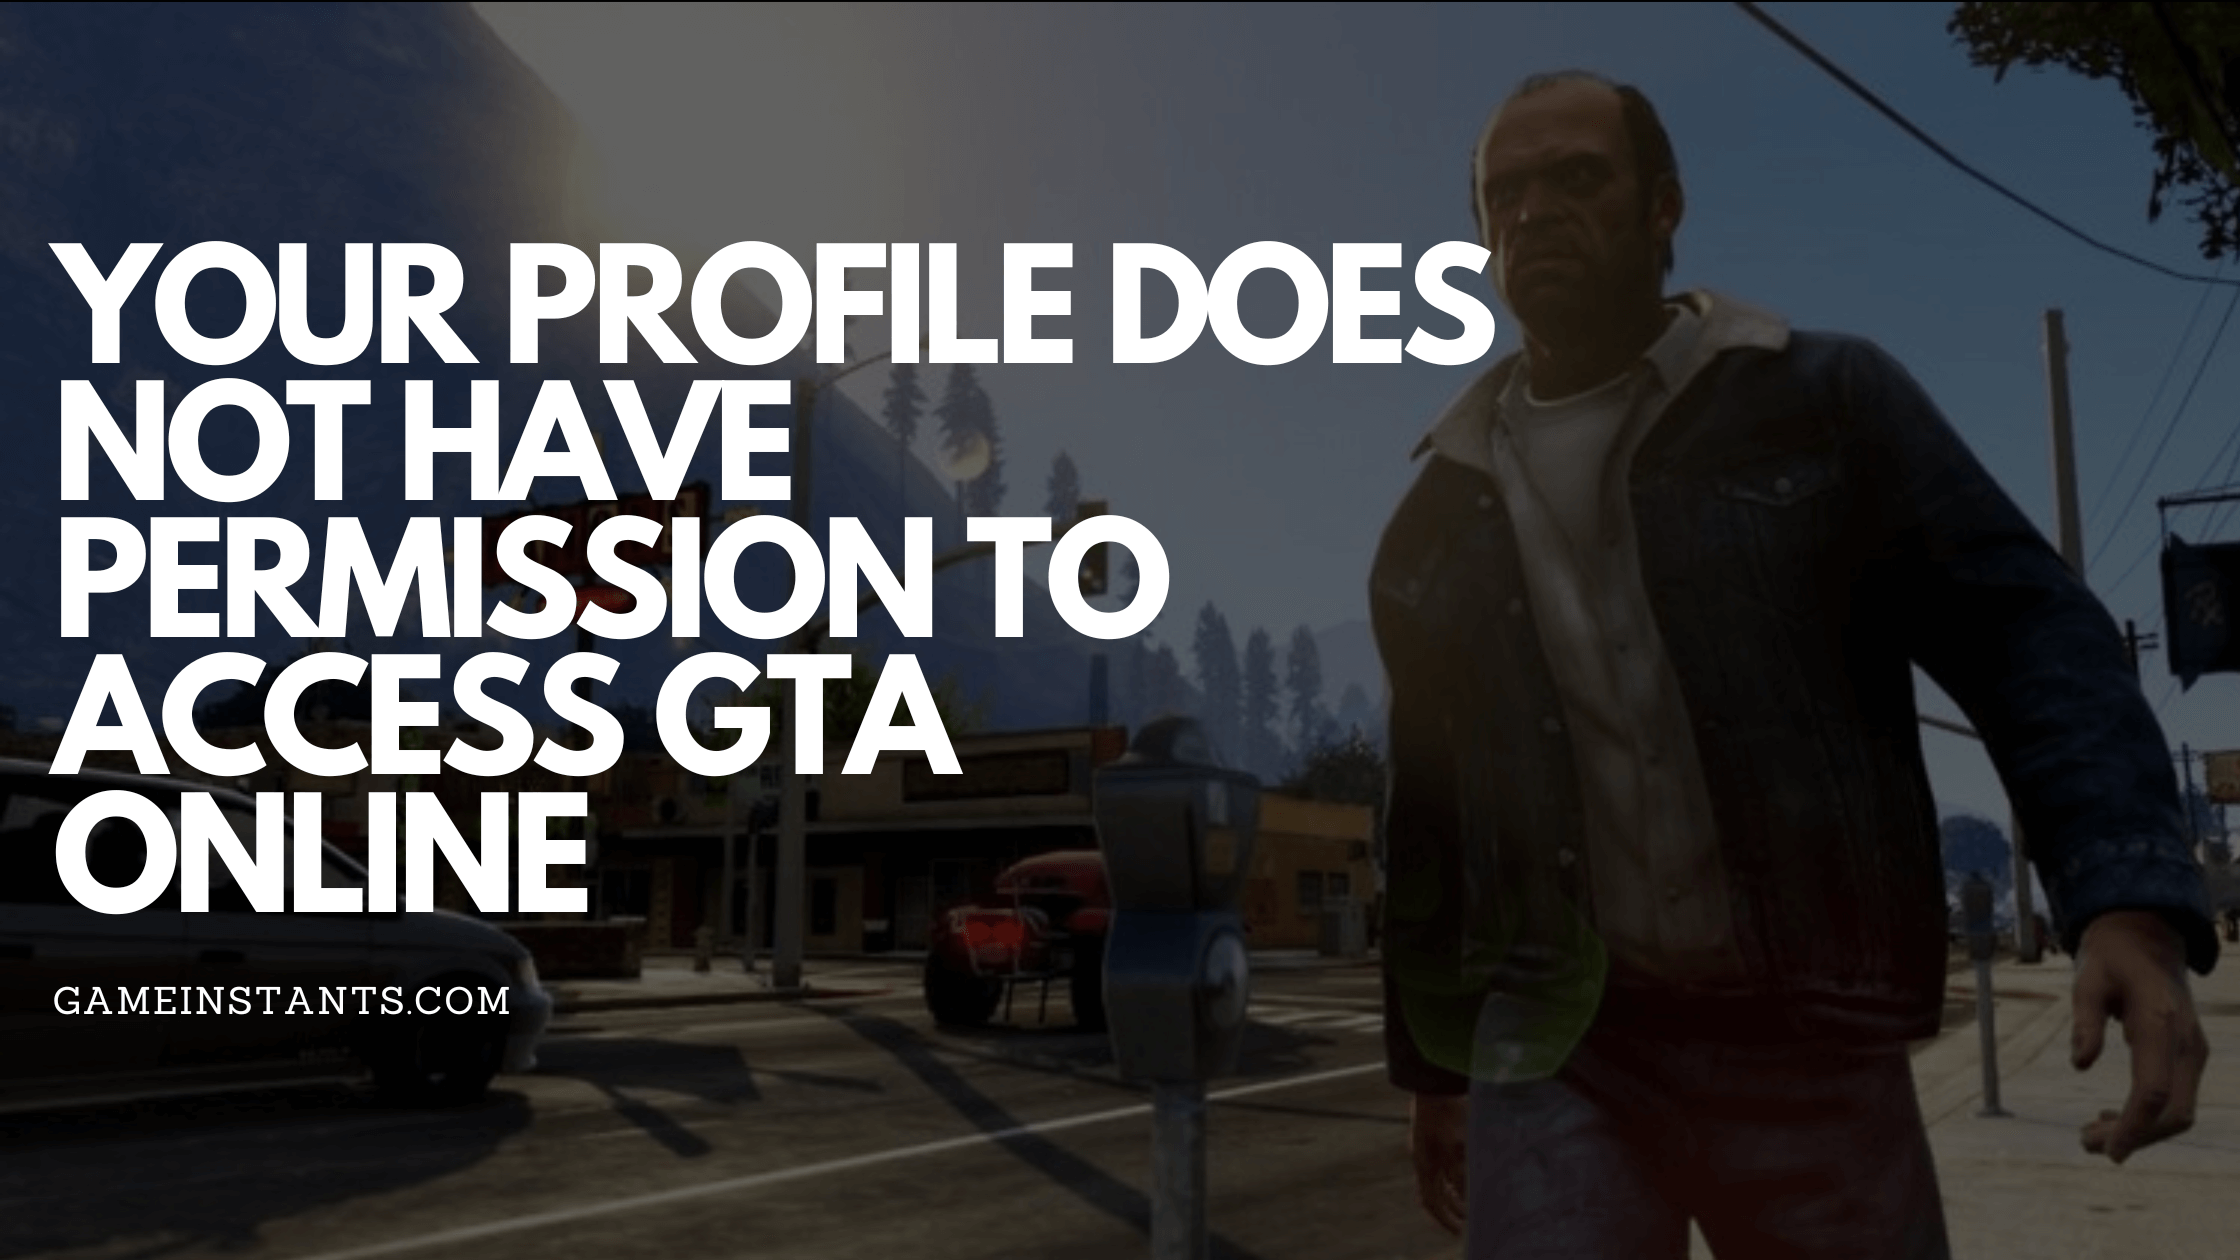 Your Profile Does Not Have Permission to Access GTA Online